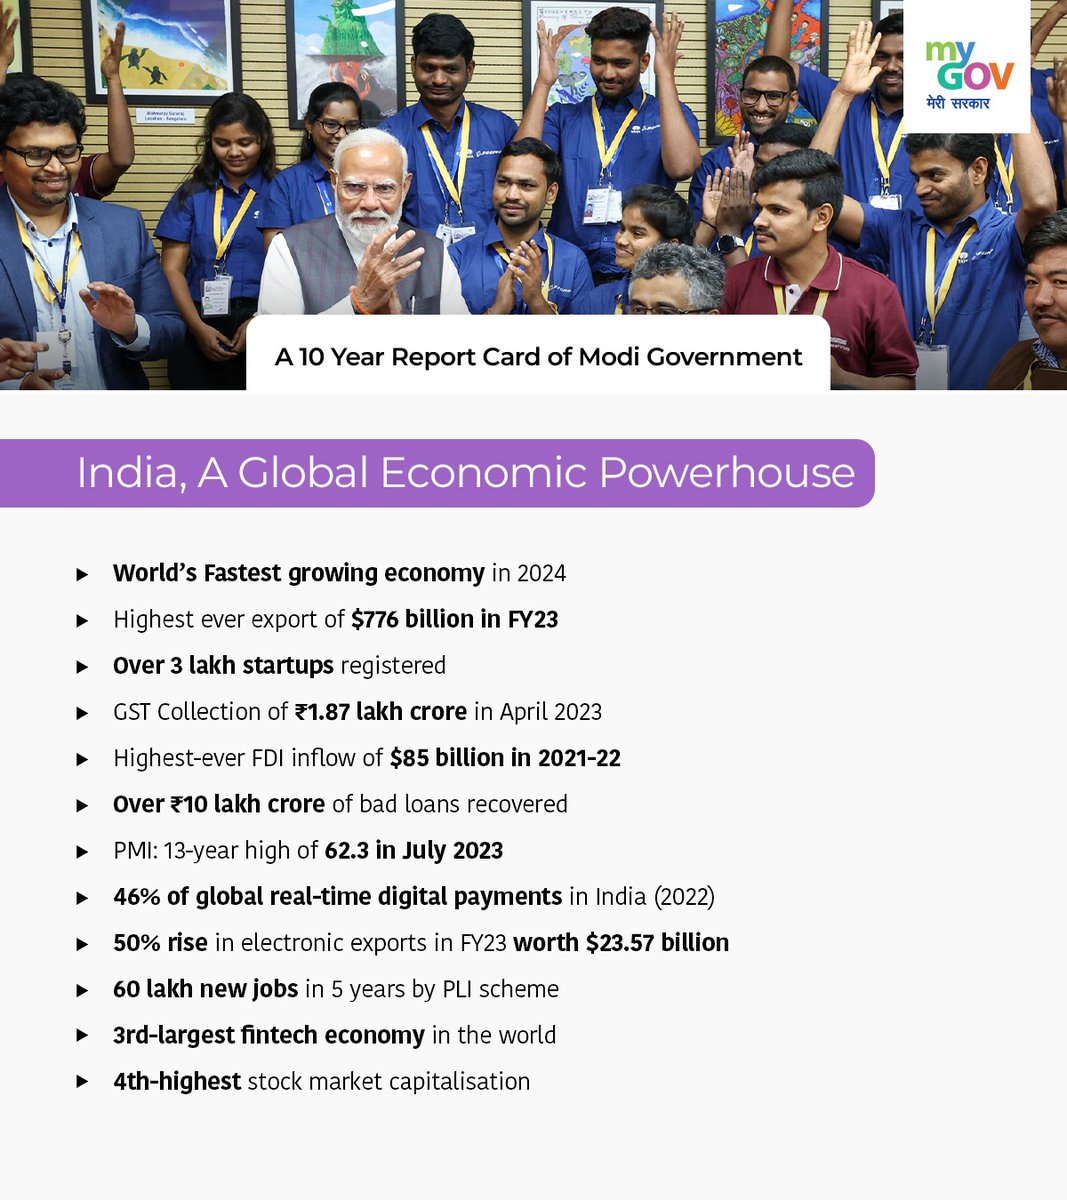 With fiscal reforms, digital advancements, economic resilience, and growth trajectory position, India is a formidable force in the global economy, driving prosperity and innovation worldwide. 

#HamaraSankalpViksitBharat